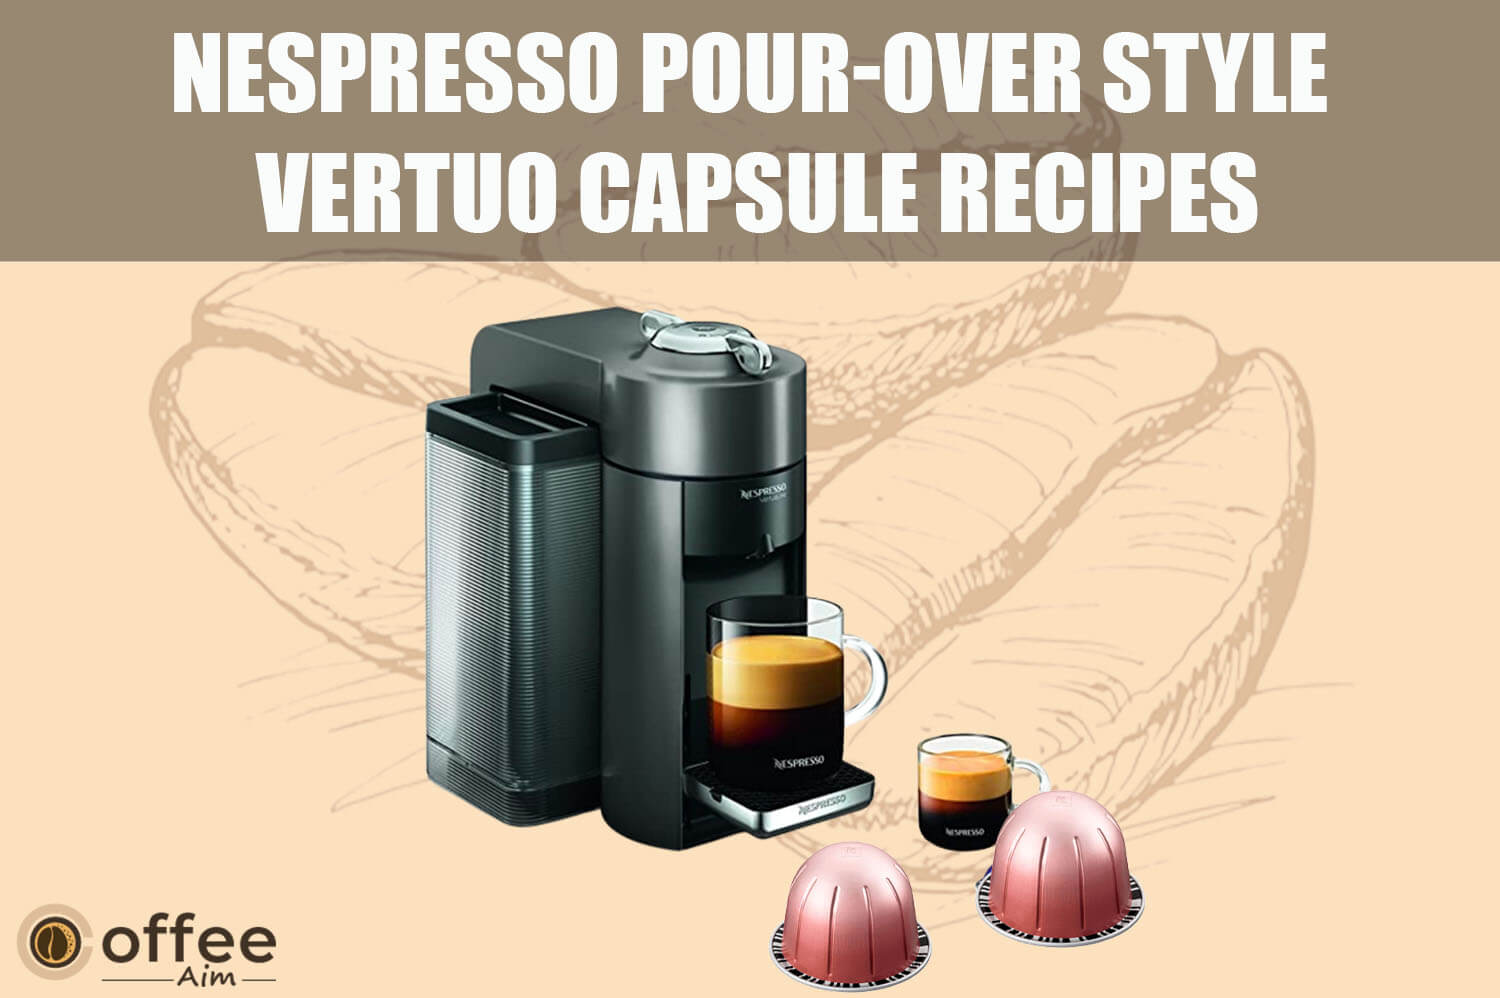 Featured image for the article "Nespresso Pour-Over Style Vertuo Capsule Recipes"